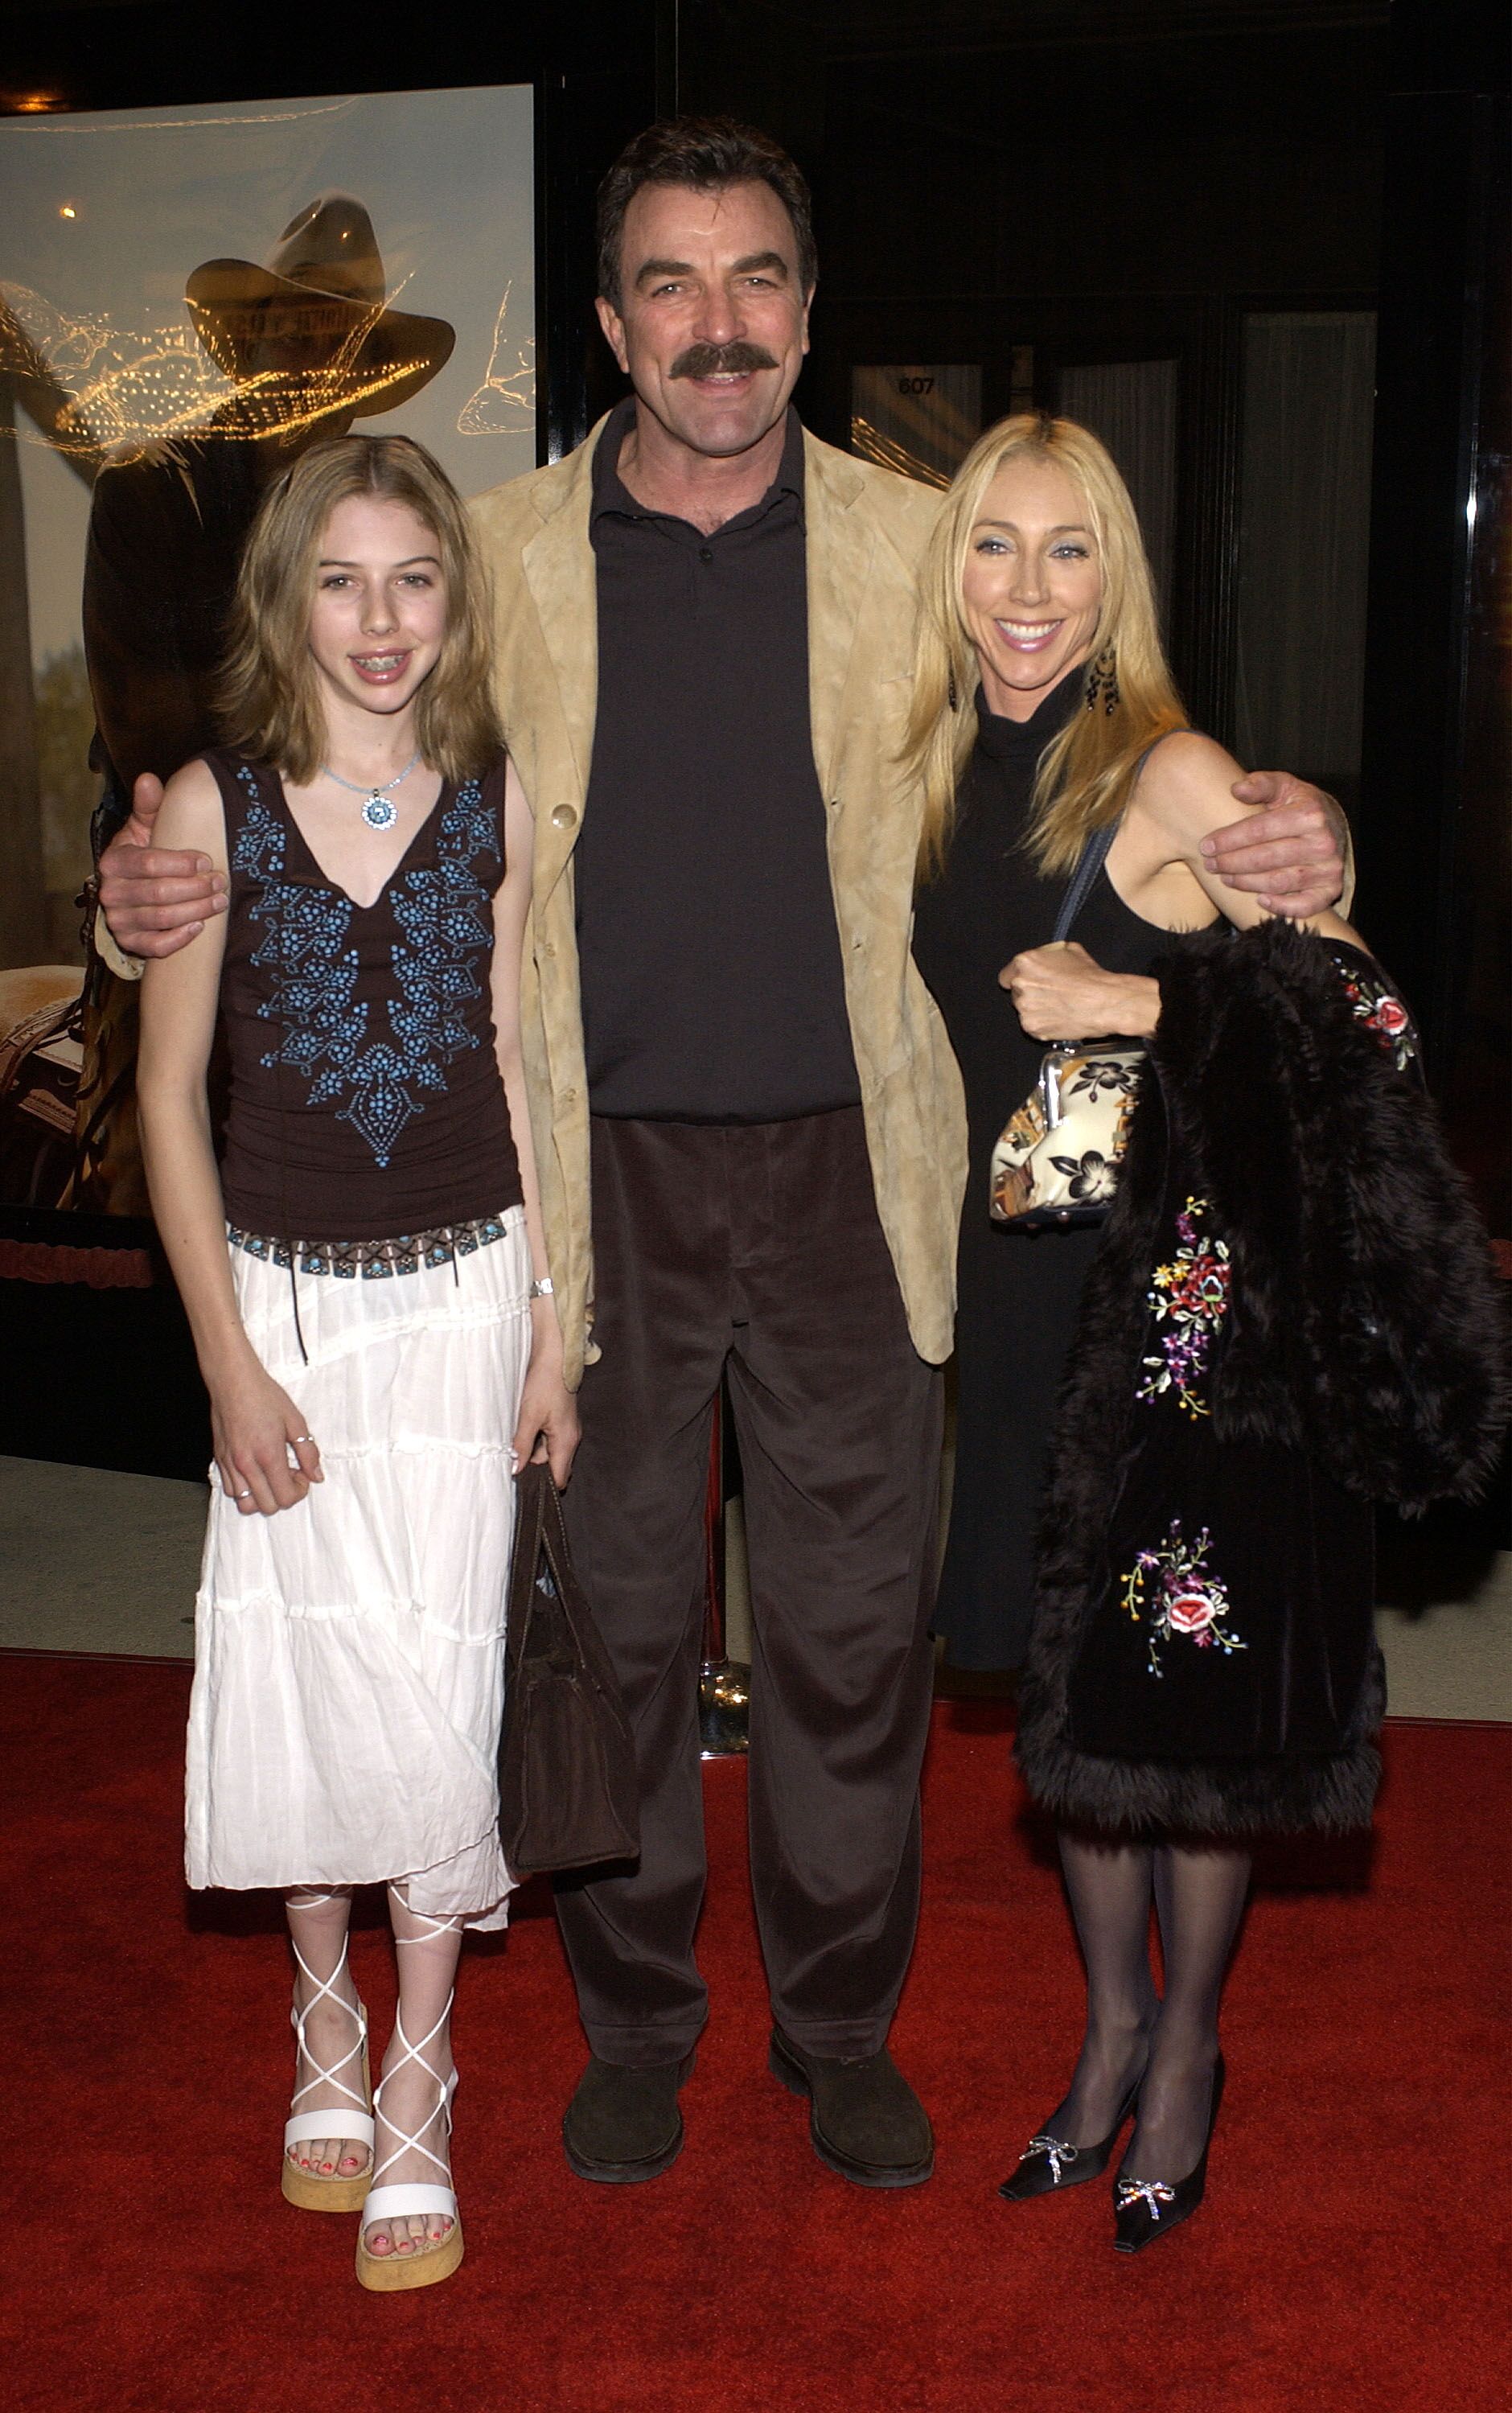 Tom Selleck, wife Jillie and daughter Hannah at the premiere of "Monte Walsh" in  2003 | Source: Getty Images